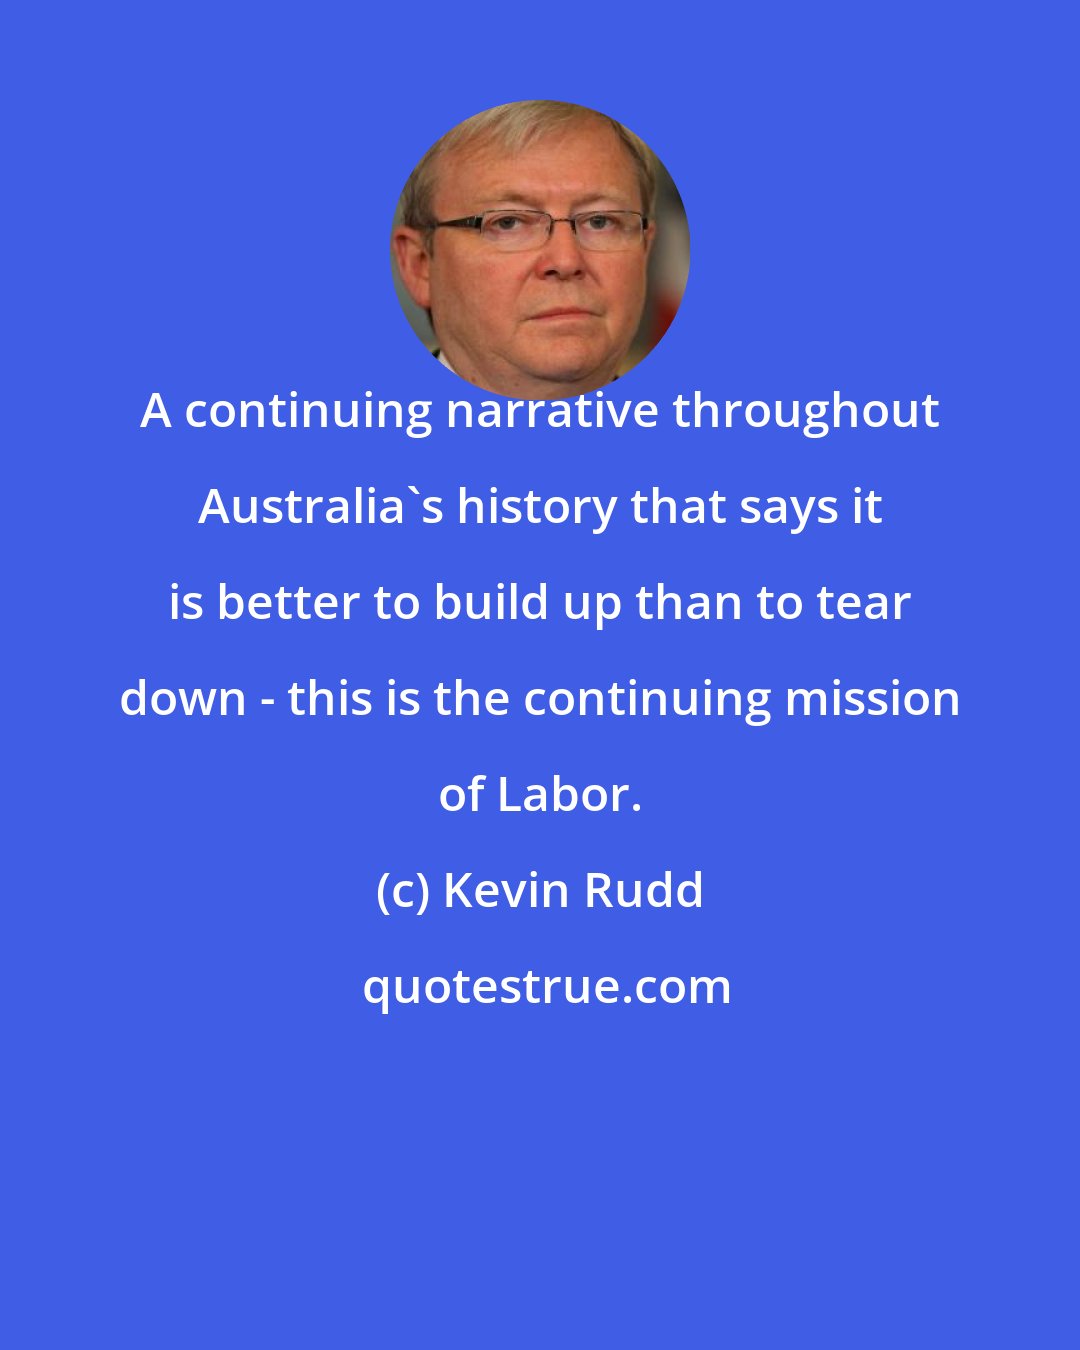 Kevin Rudd: A continuing narrative throughout Australia's history that says it is better to build up than to tear down - this is the continuing mission of Labor.